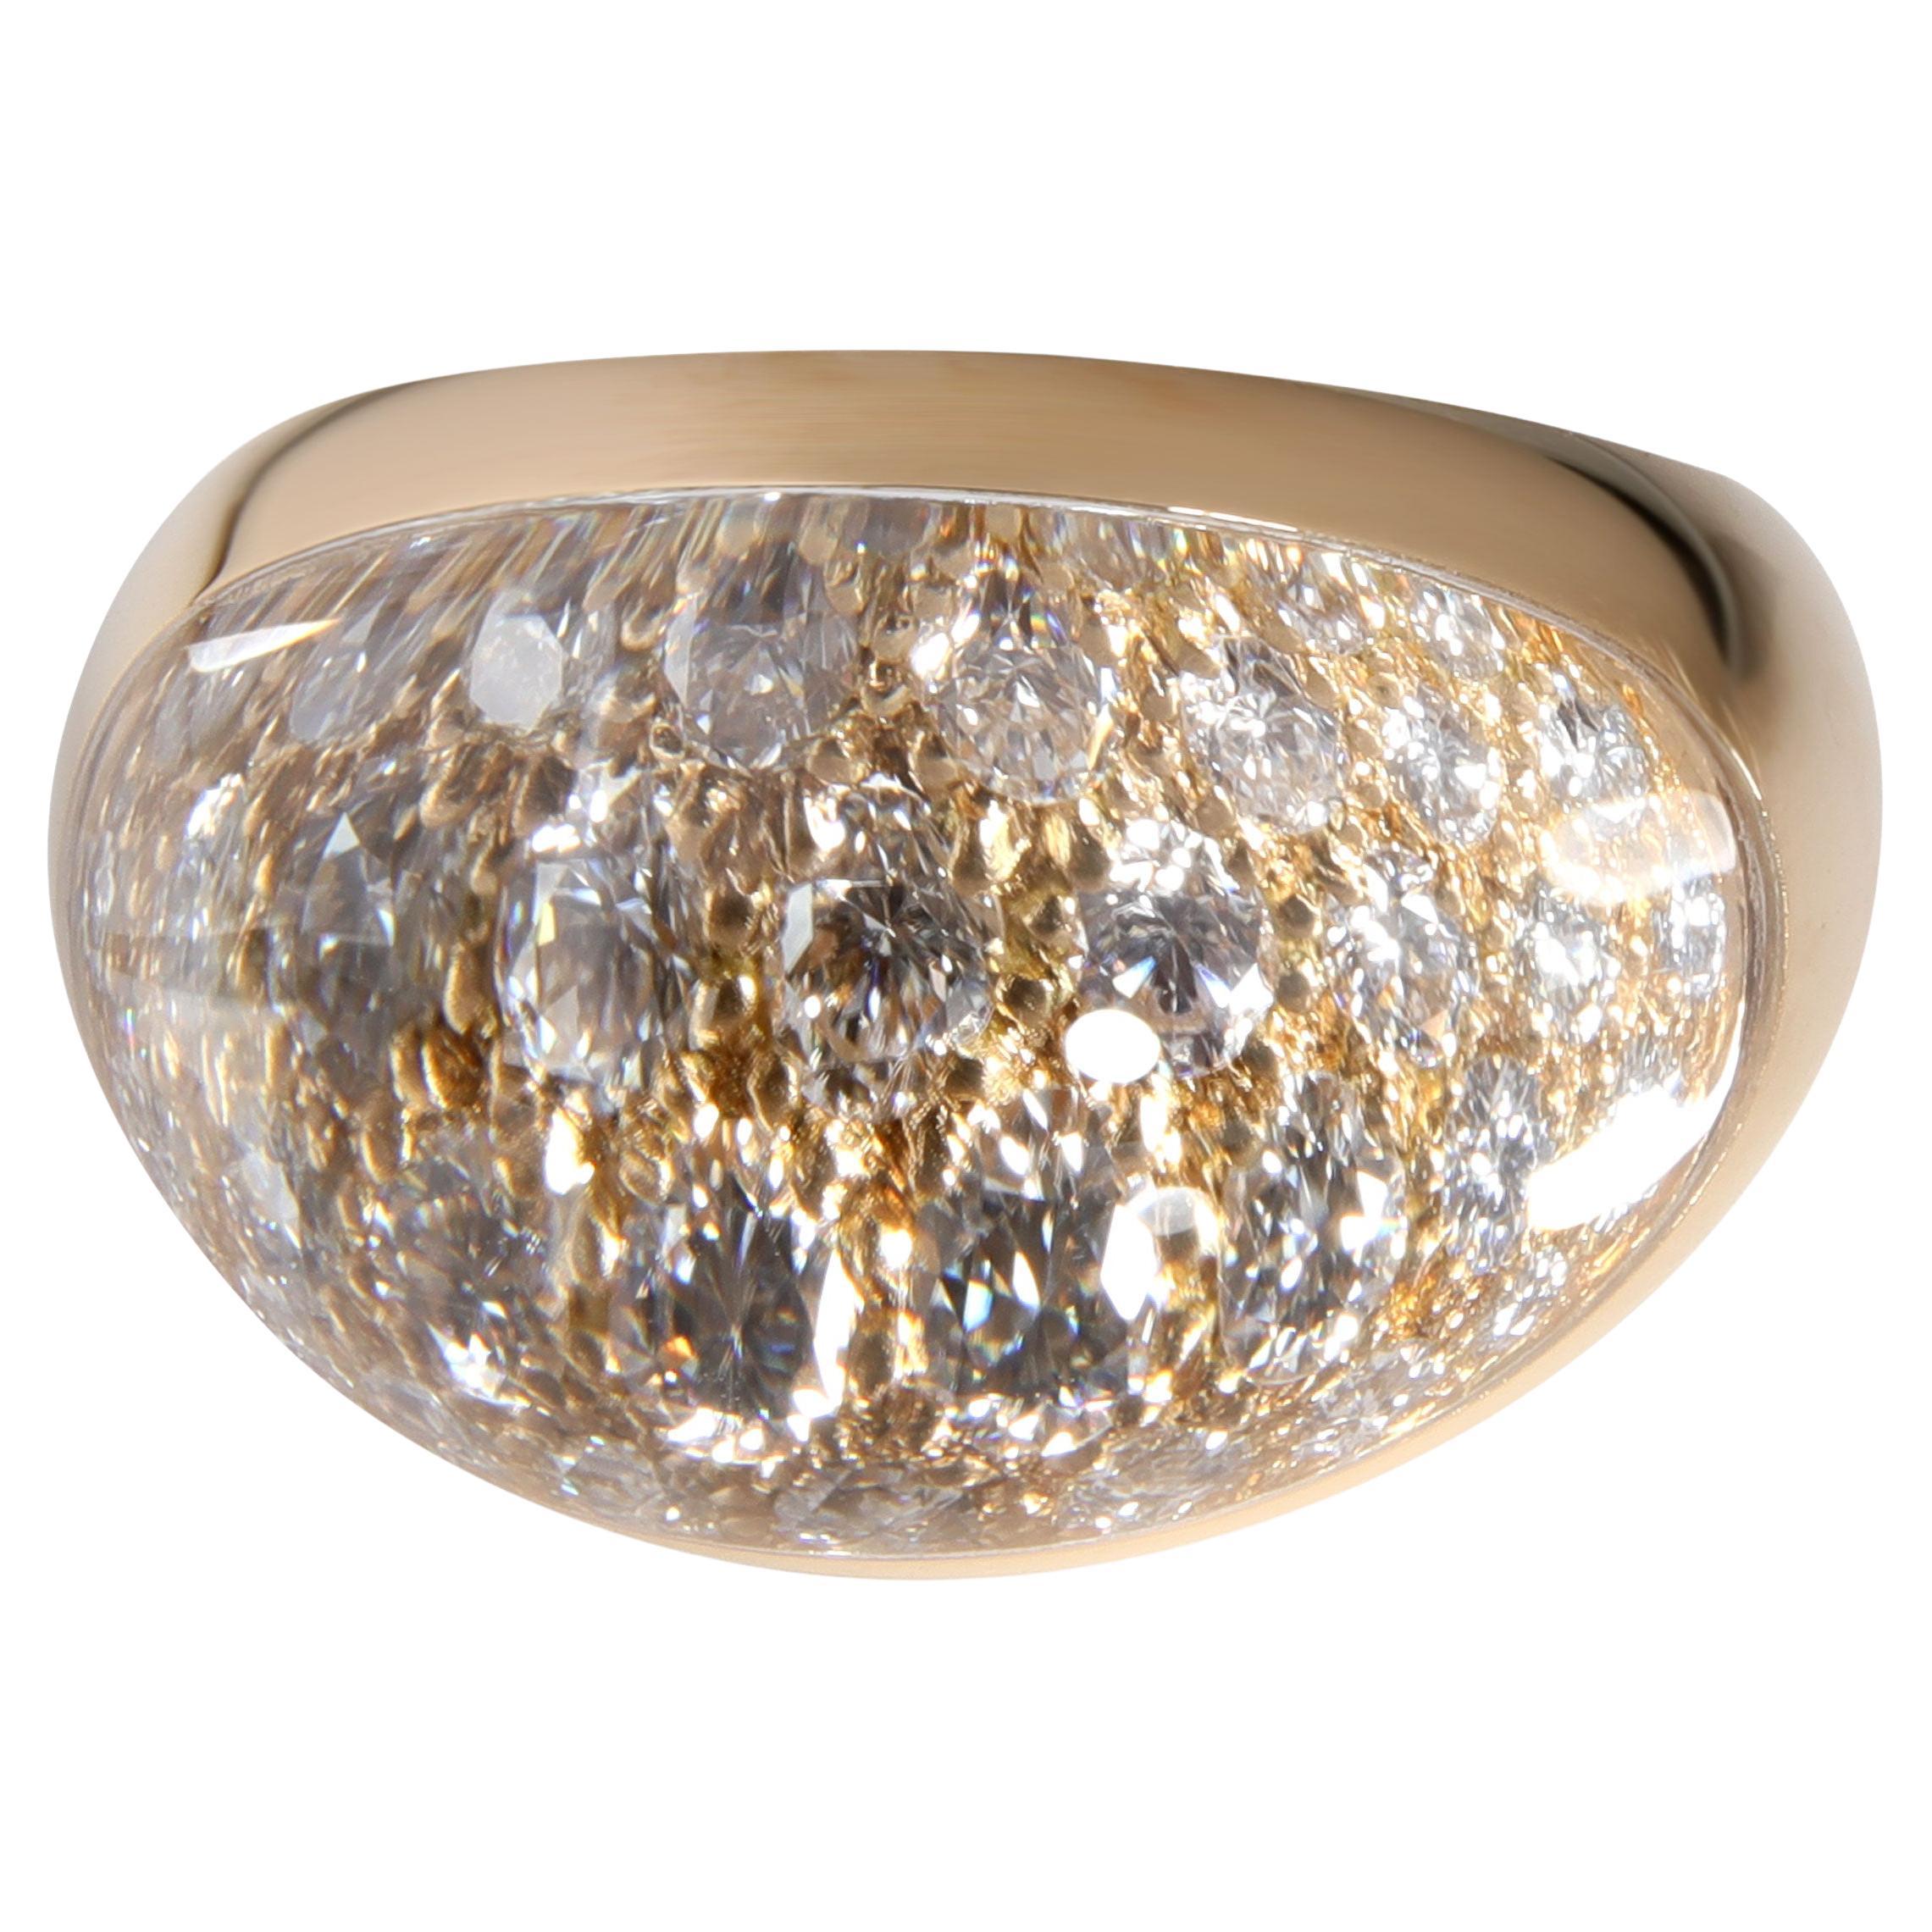 Cartier Myst Diamond & Crystal Dome Ring in 18K Yellow Gold 1.00 Ctw